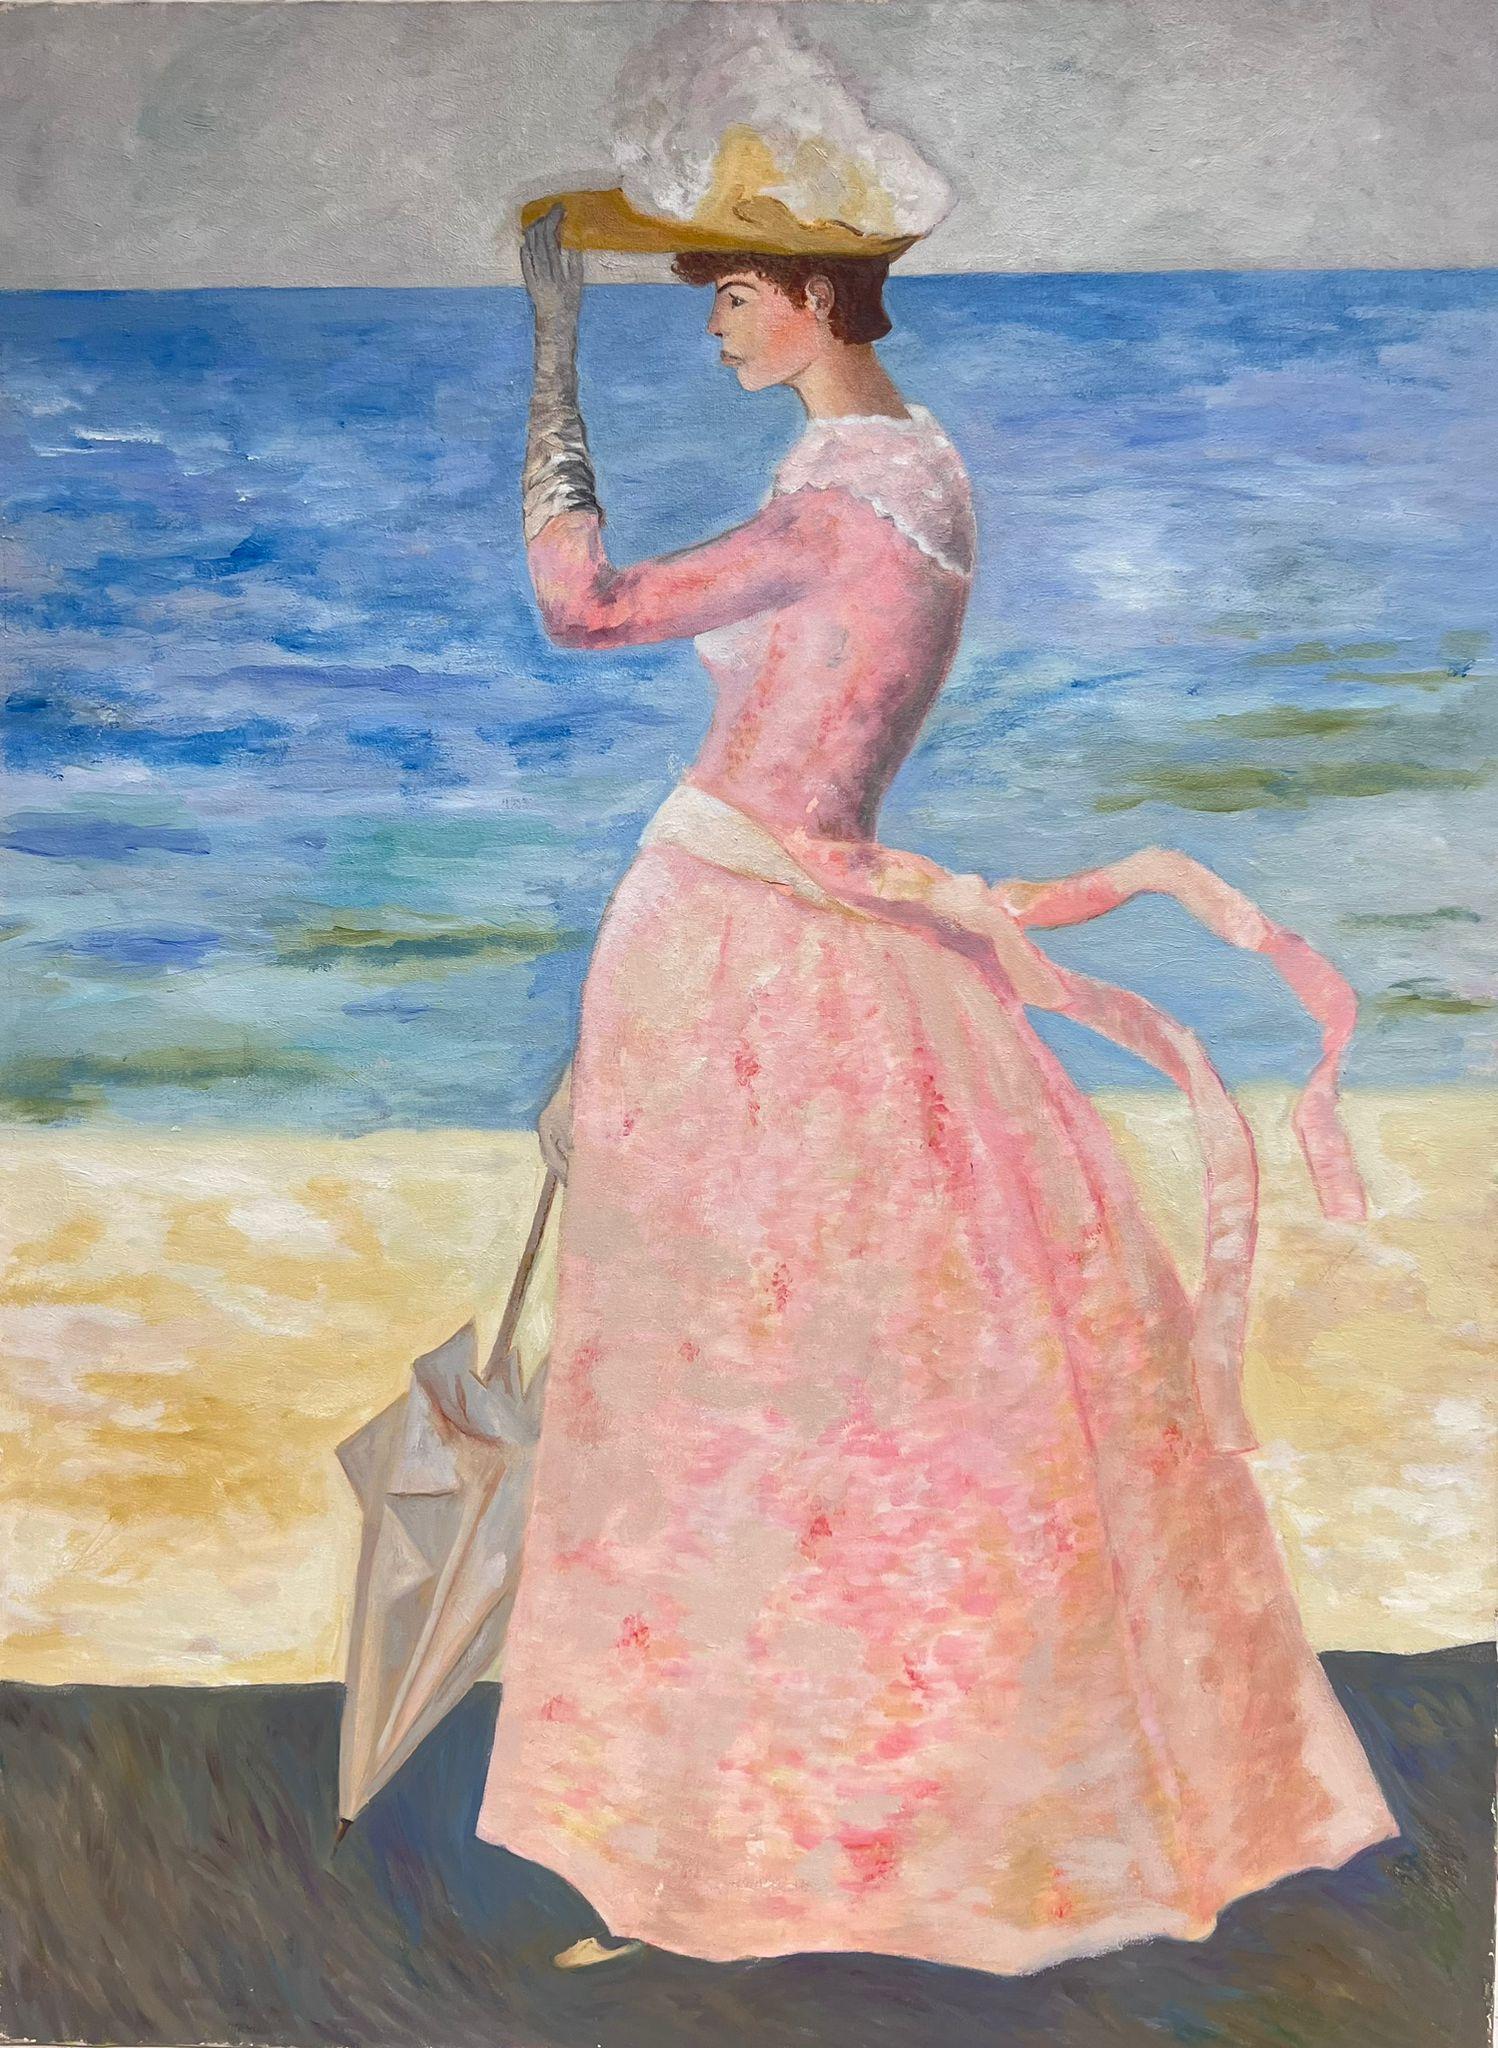 Portrait of Elegant Lady in Pink Dress with Parasol by Beach Original French Oil - Modern Painting by French School 